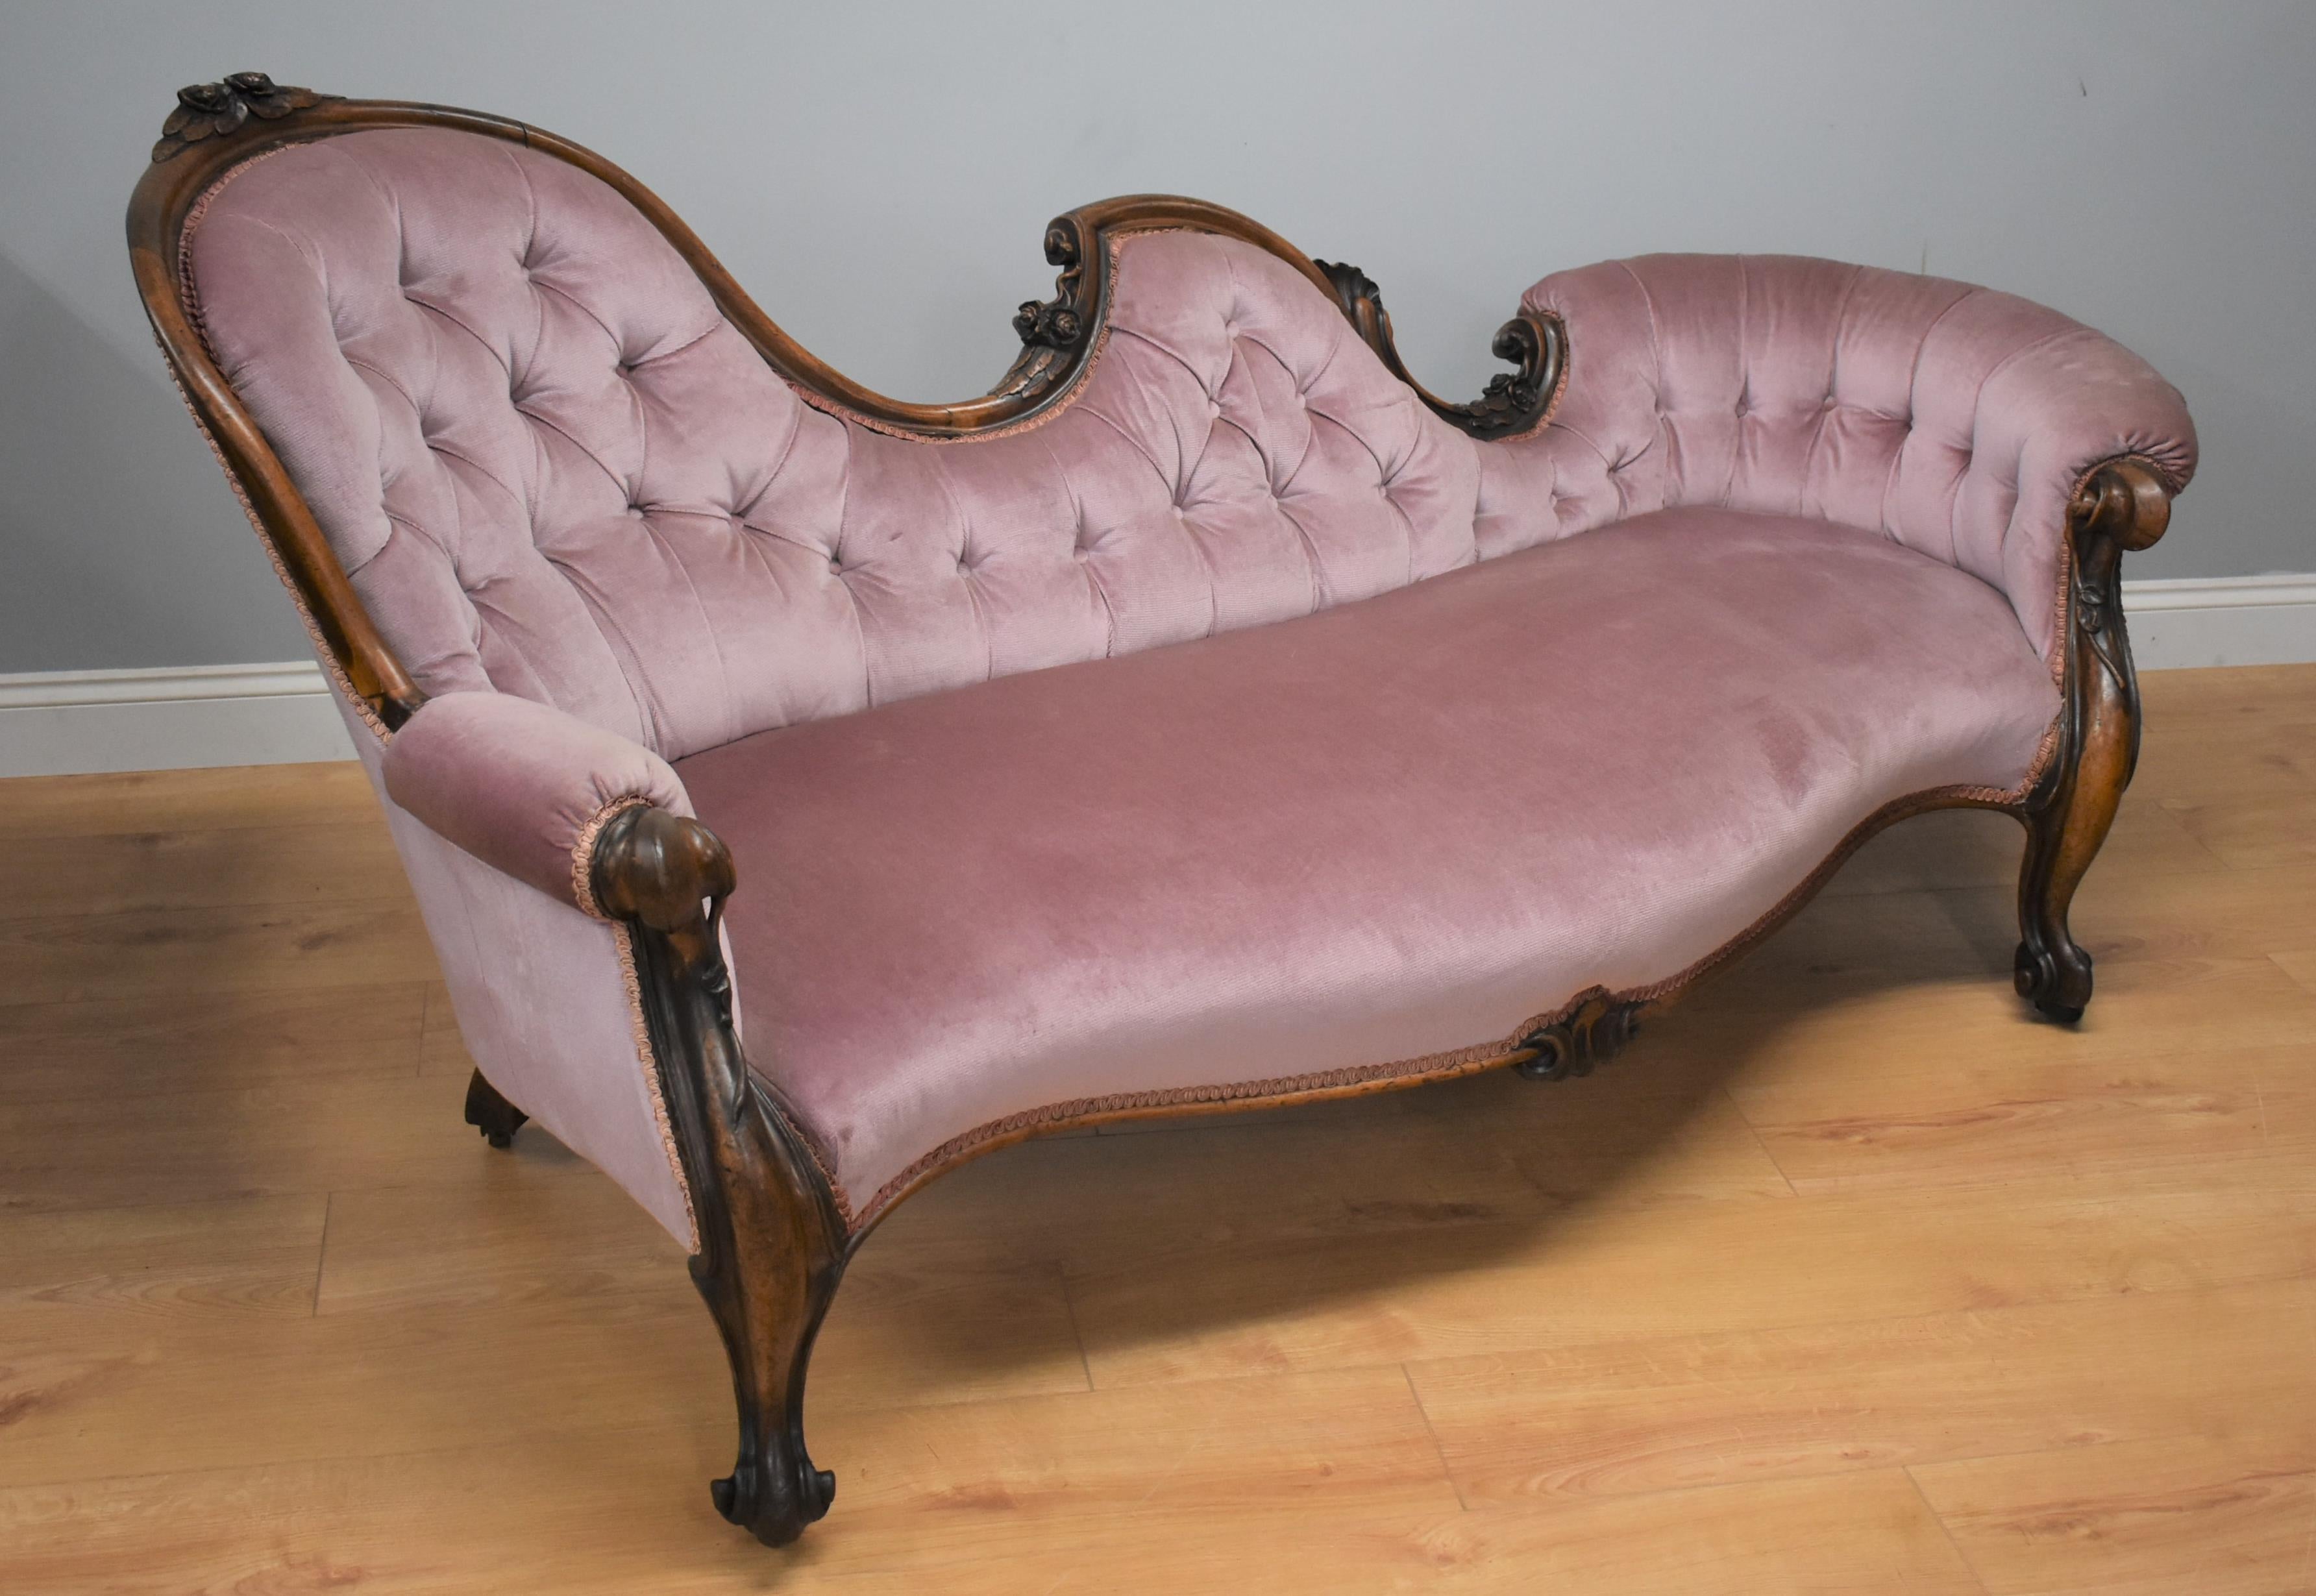 For sale is this good quality Victorian walnut antique chaise in superb condition, with ornate carvings with button back and covered in a lavender fabric in very nice condition, standing on carved cabriol legs on castors. Structurally sound.